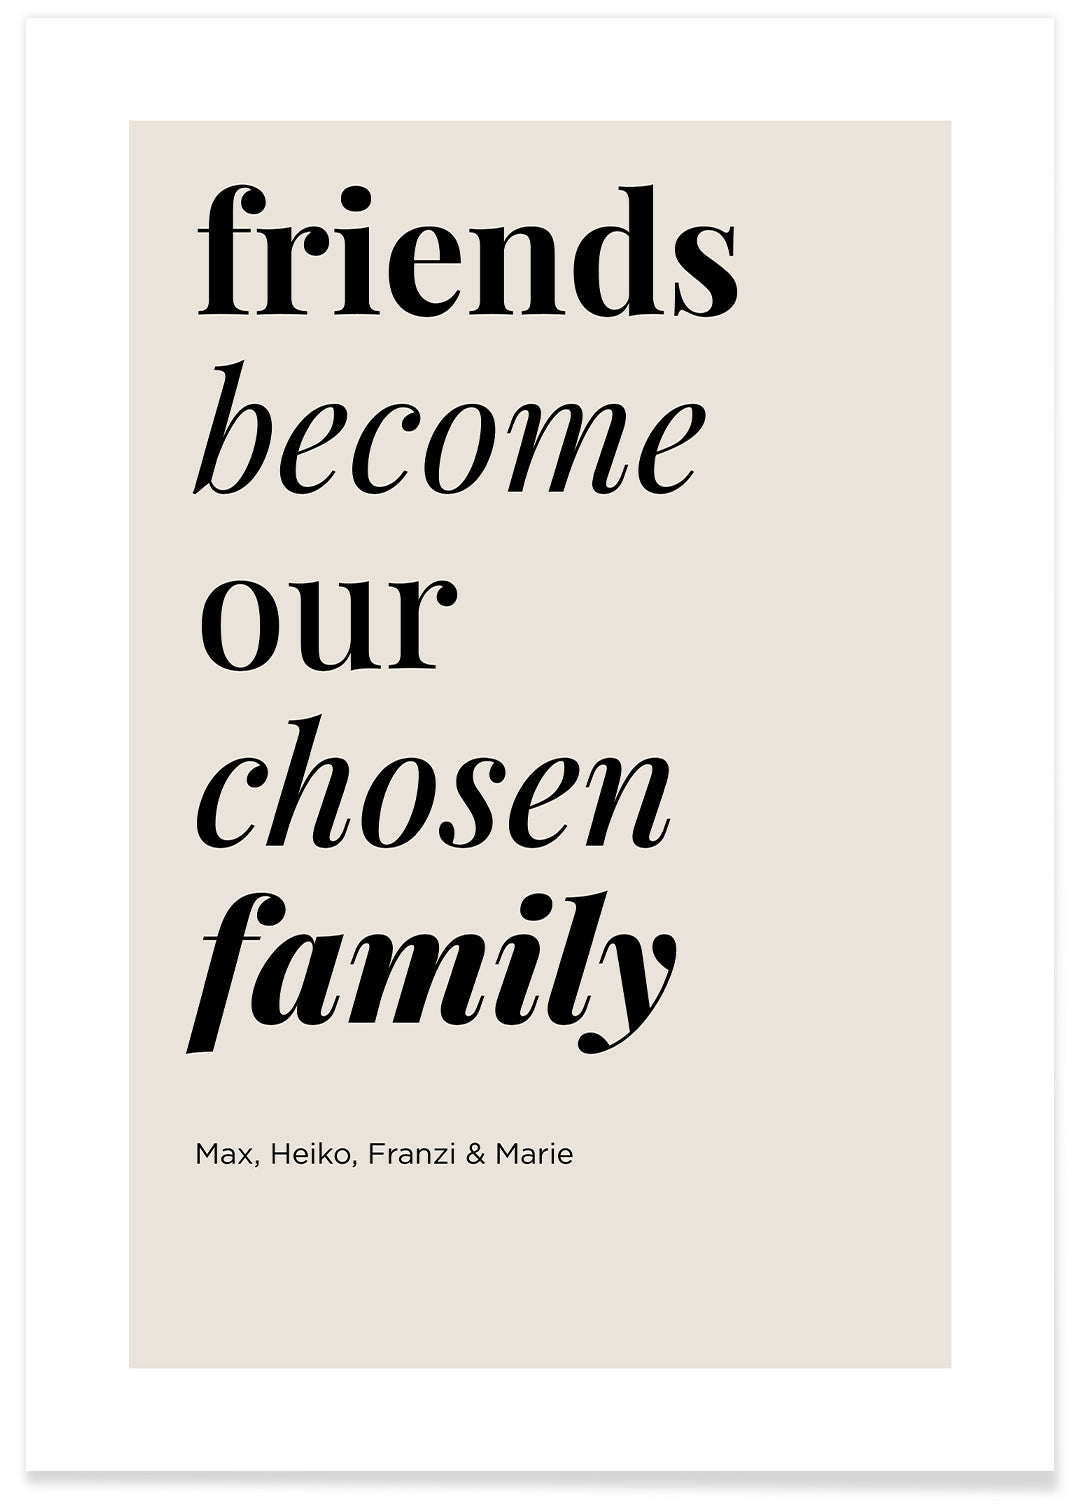 Poster "friends become family"